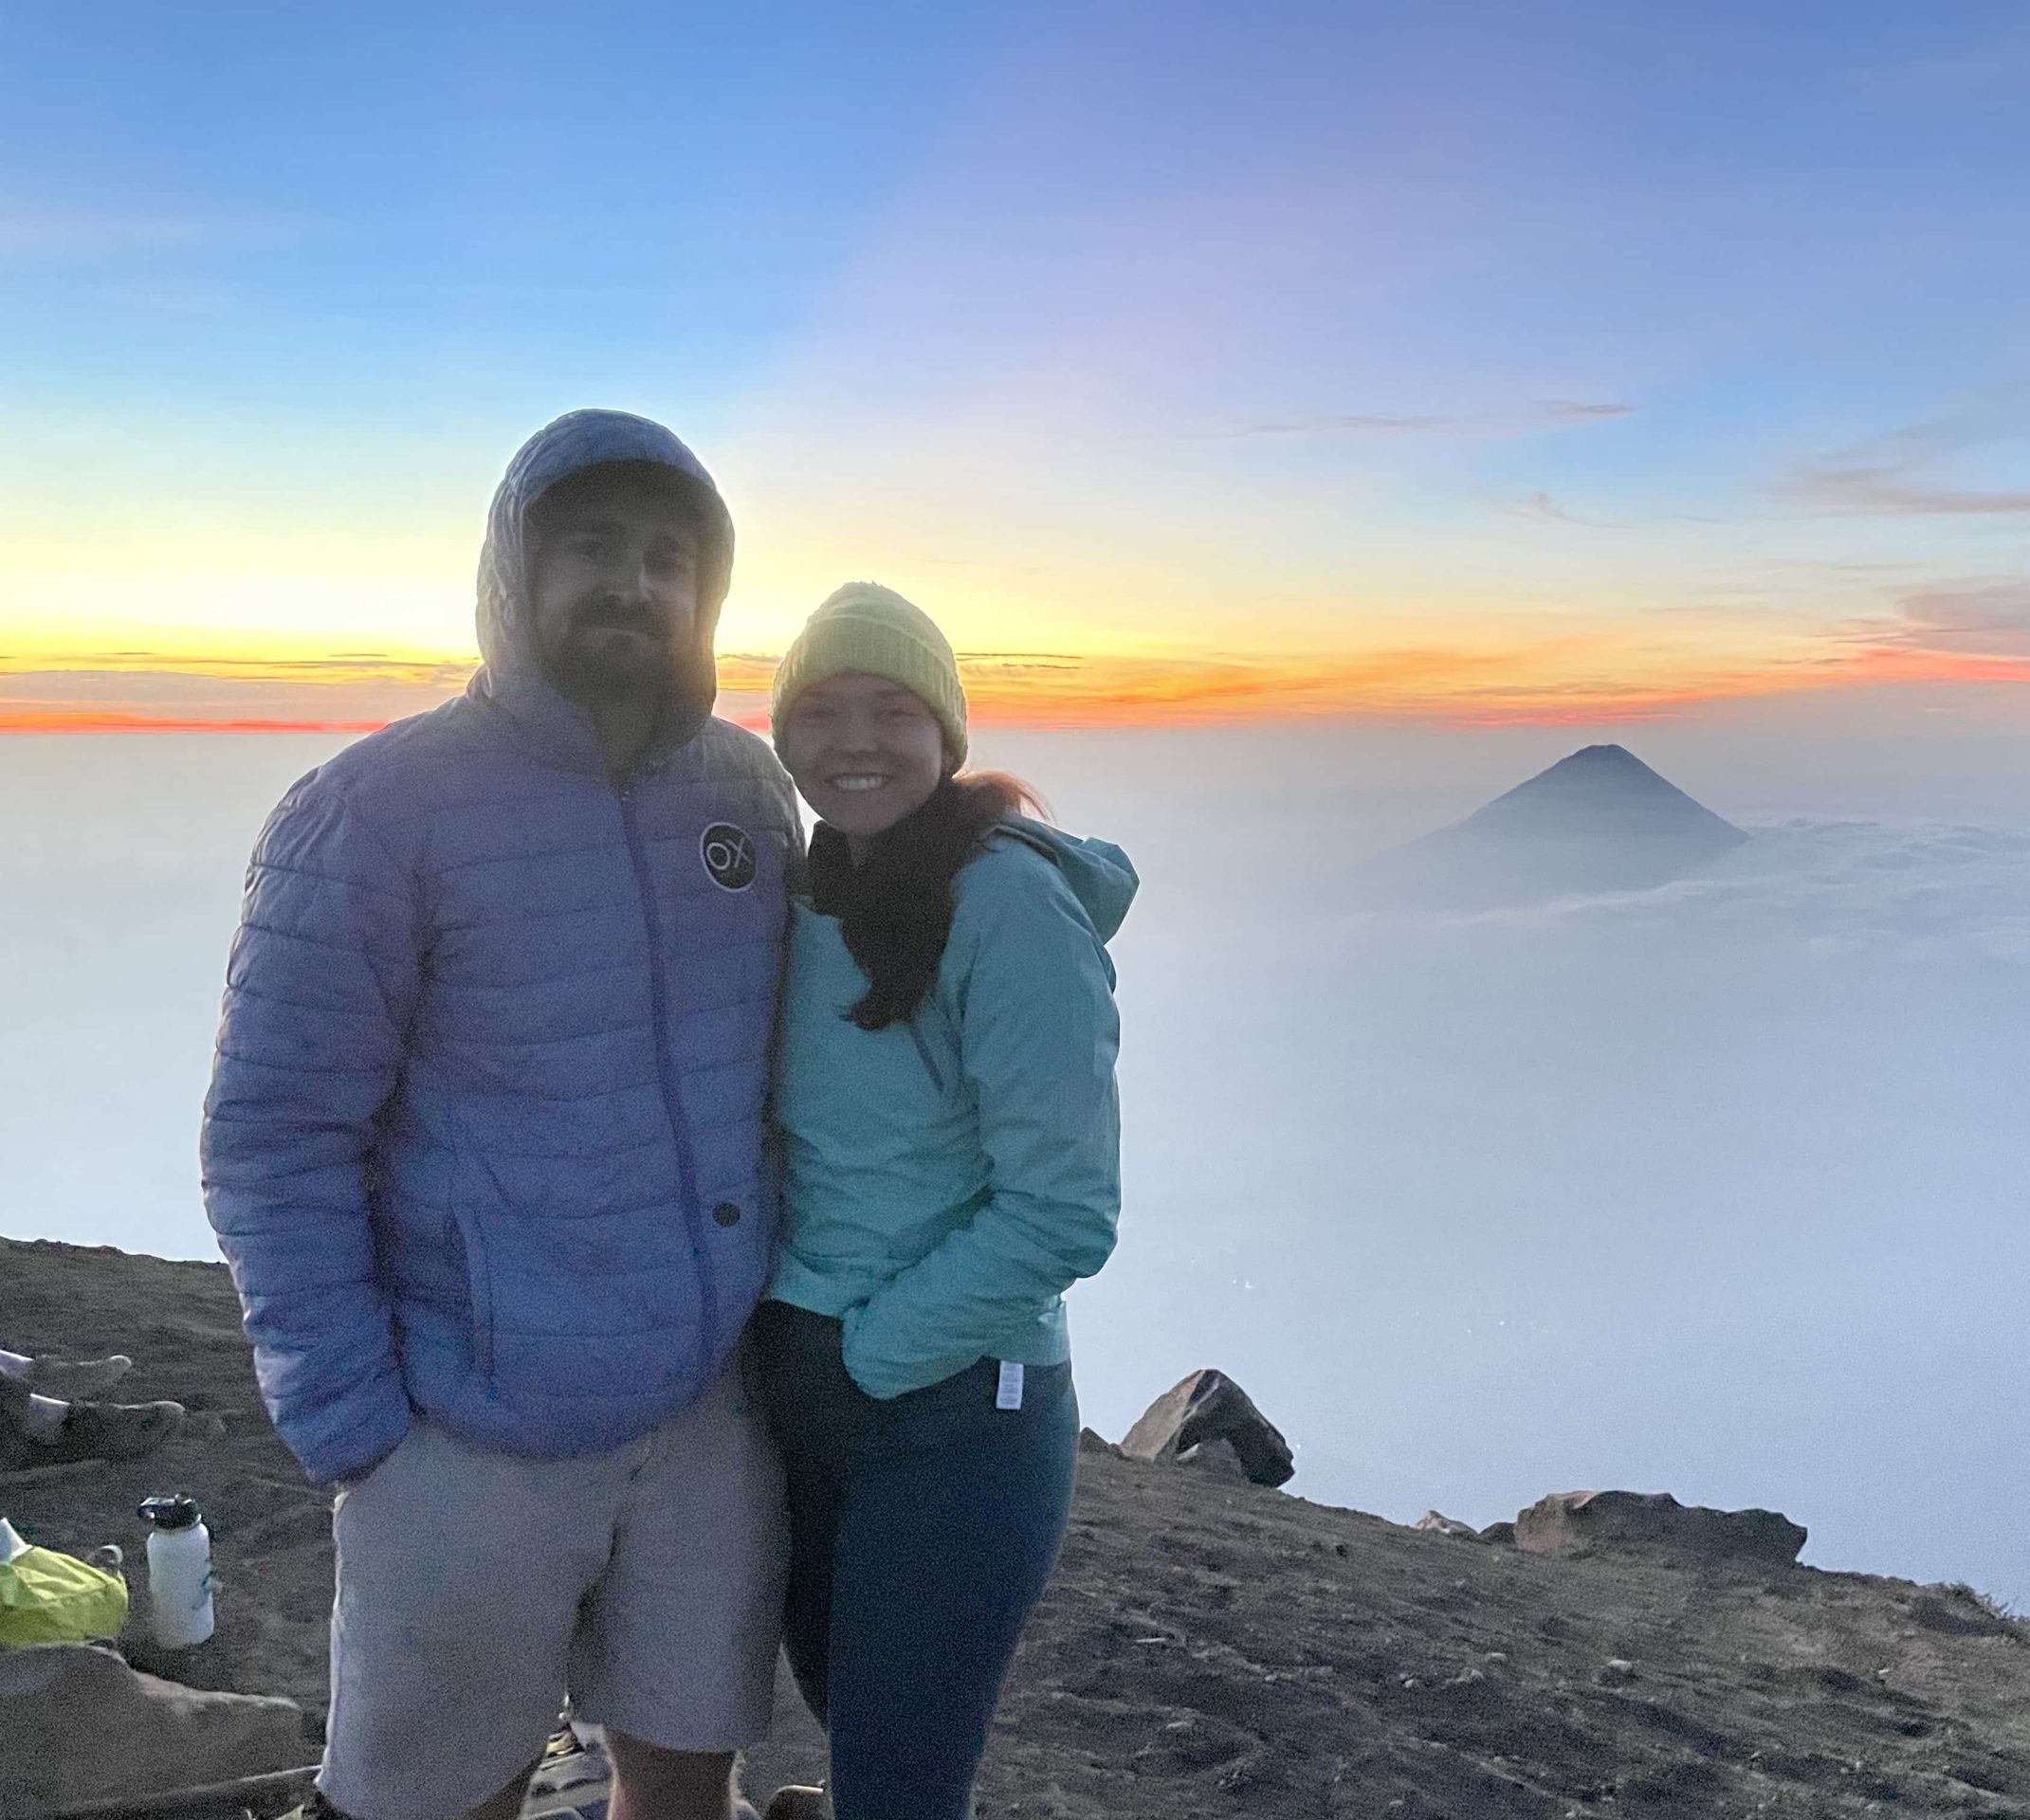 A shot of Caleb Rothwell next to his wife, standing on top of a mountain